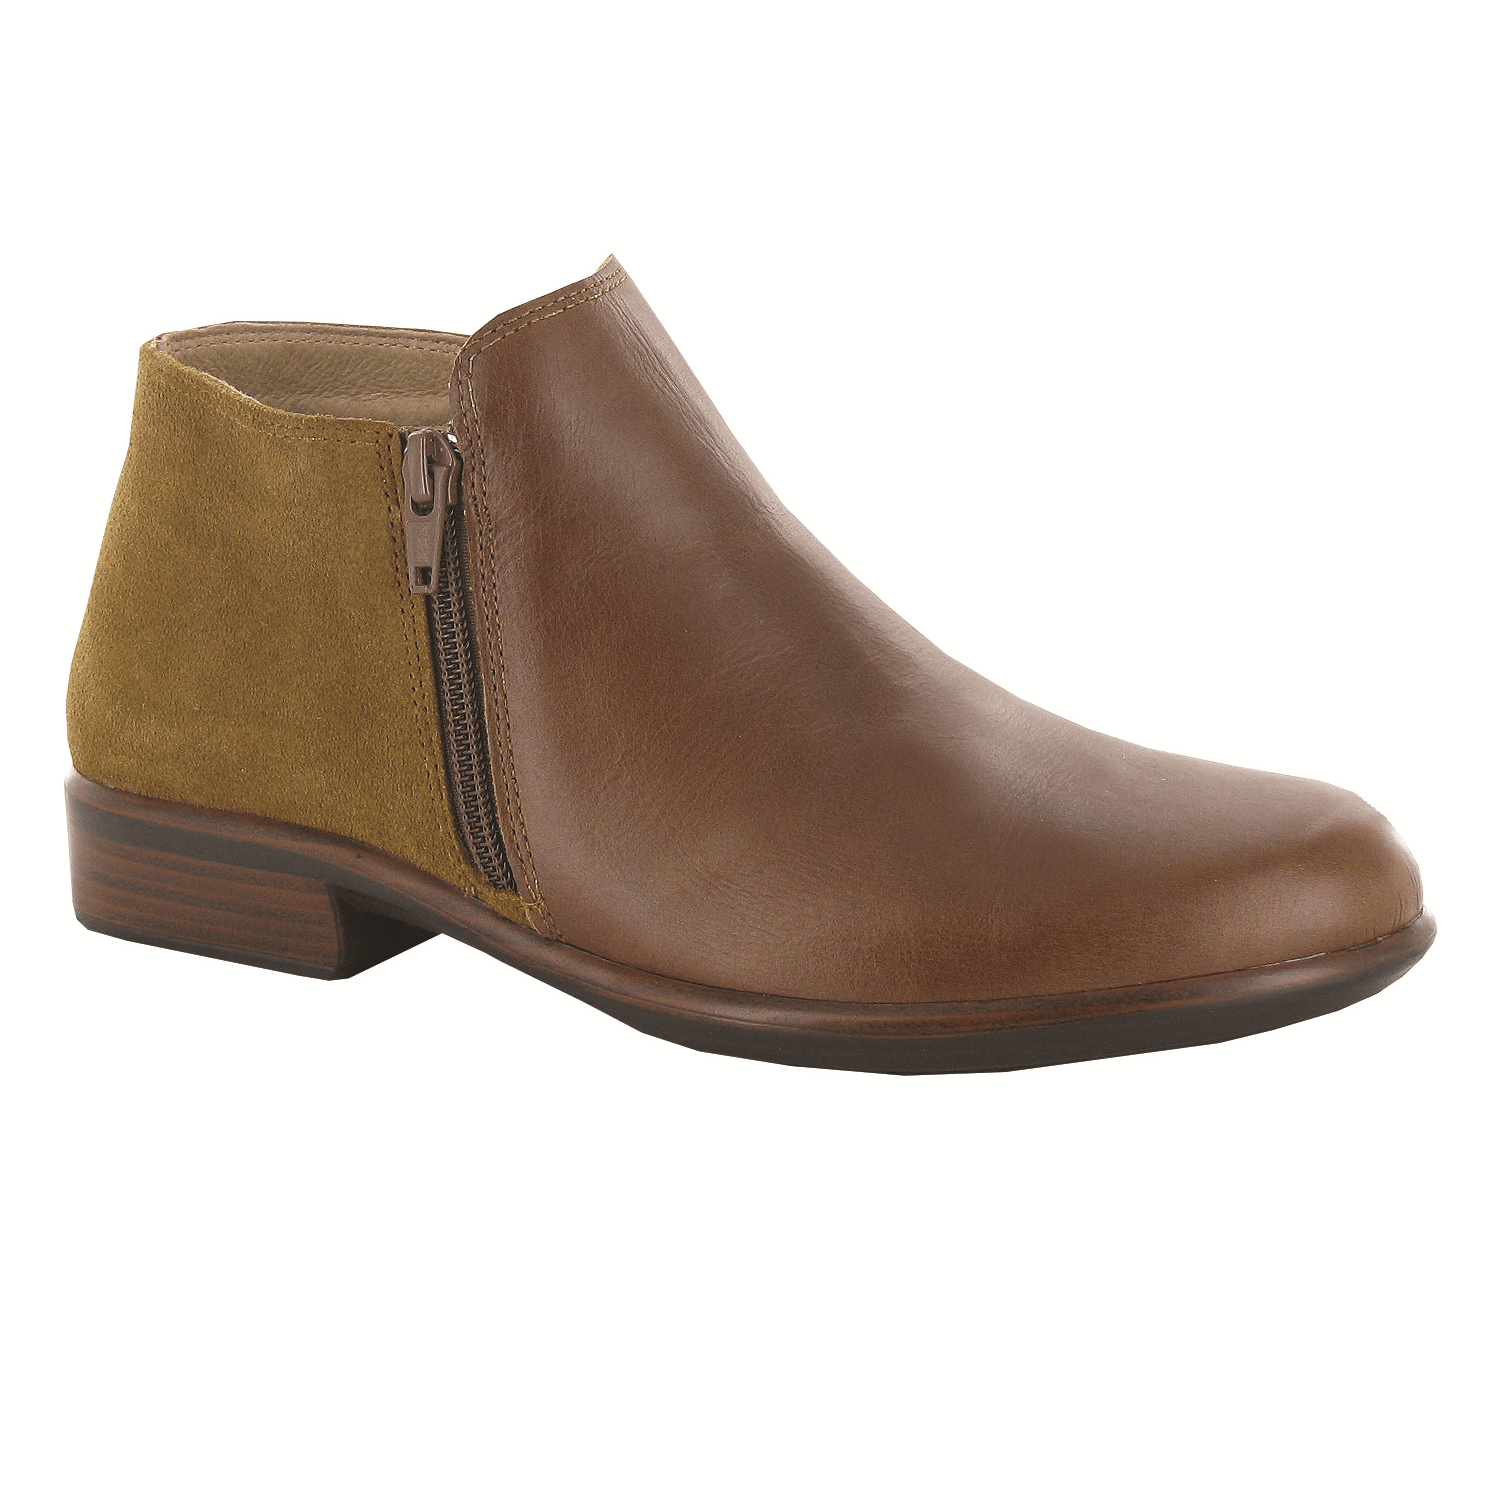 Naot Women's Helm Leather Anatomic Cork Footbed Bootie | Simons Shoes